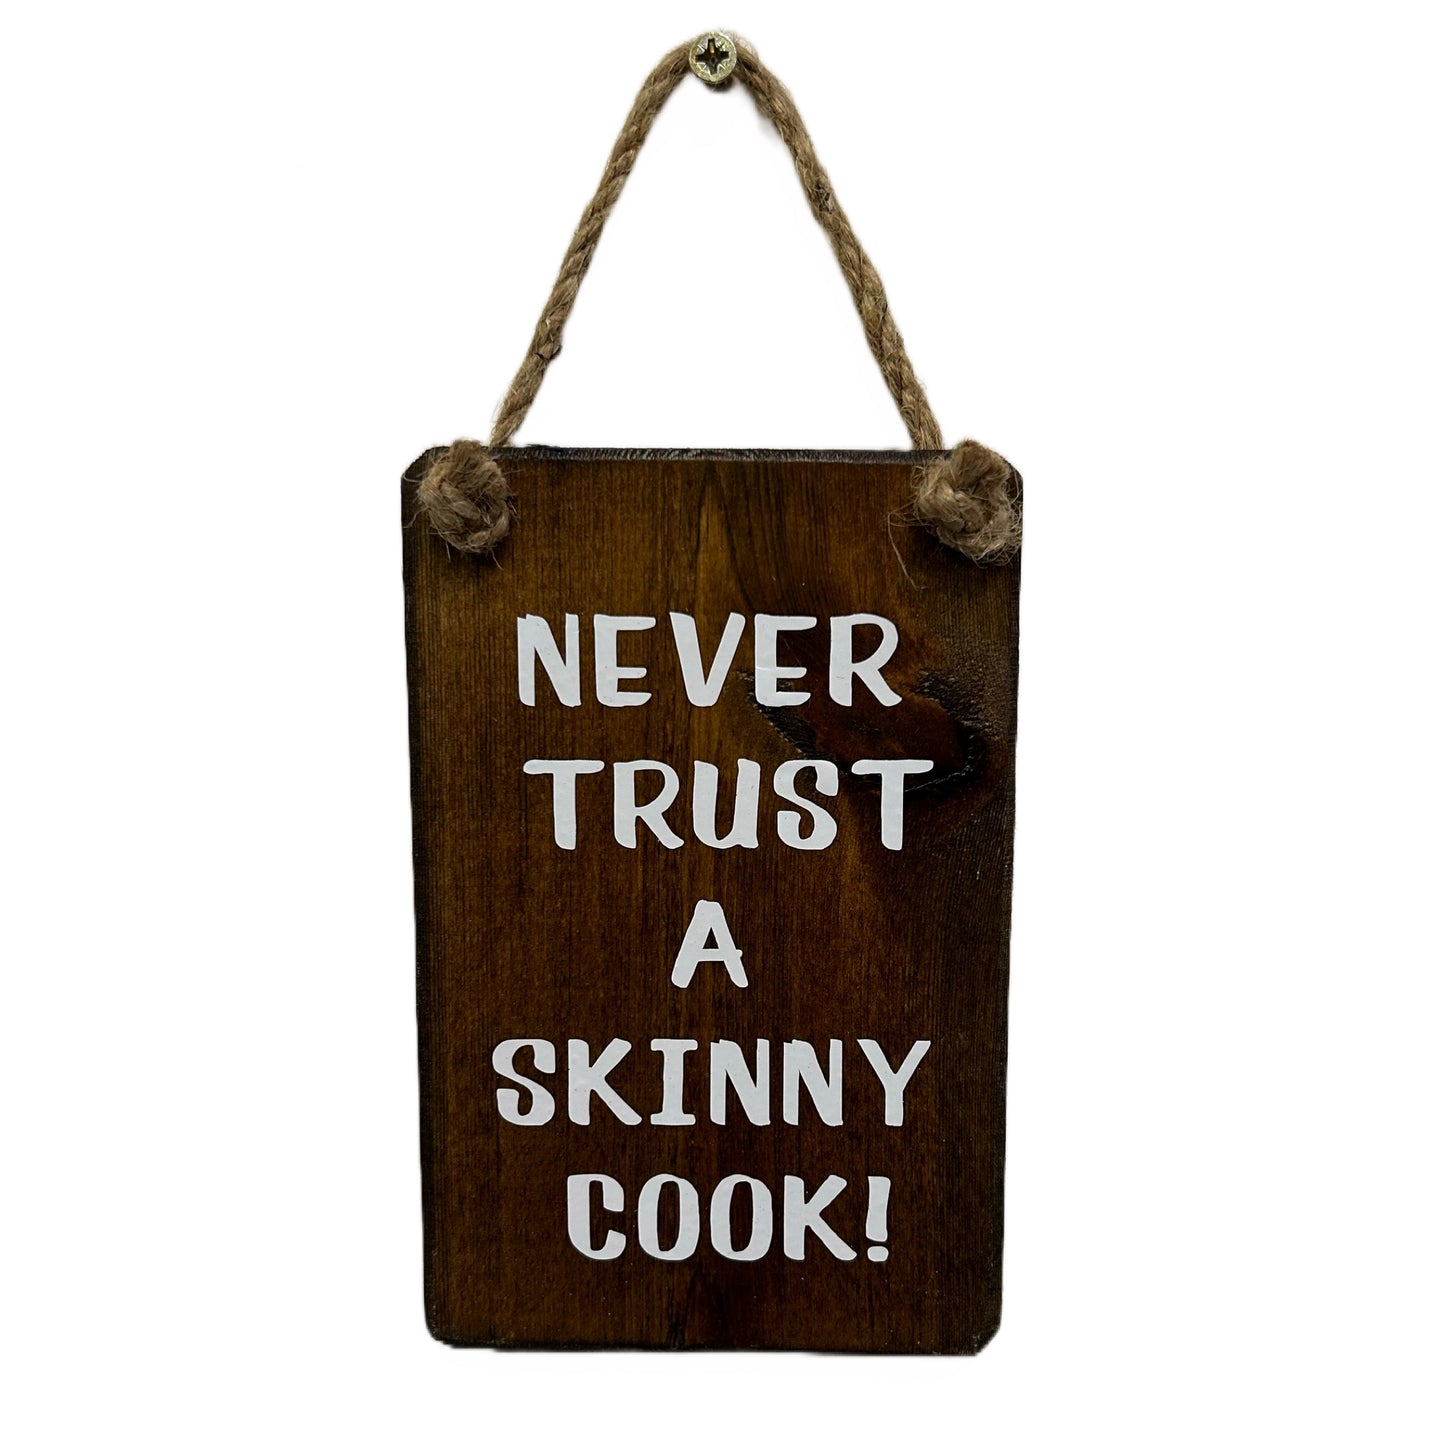 Never trust a skinny cook!